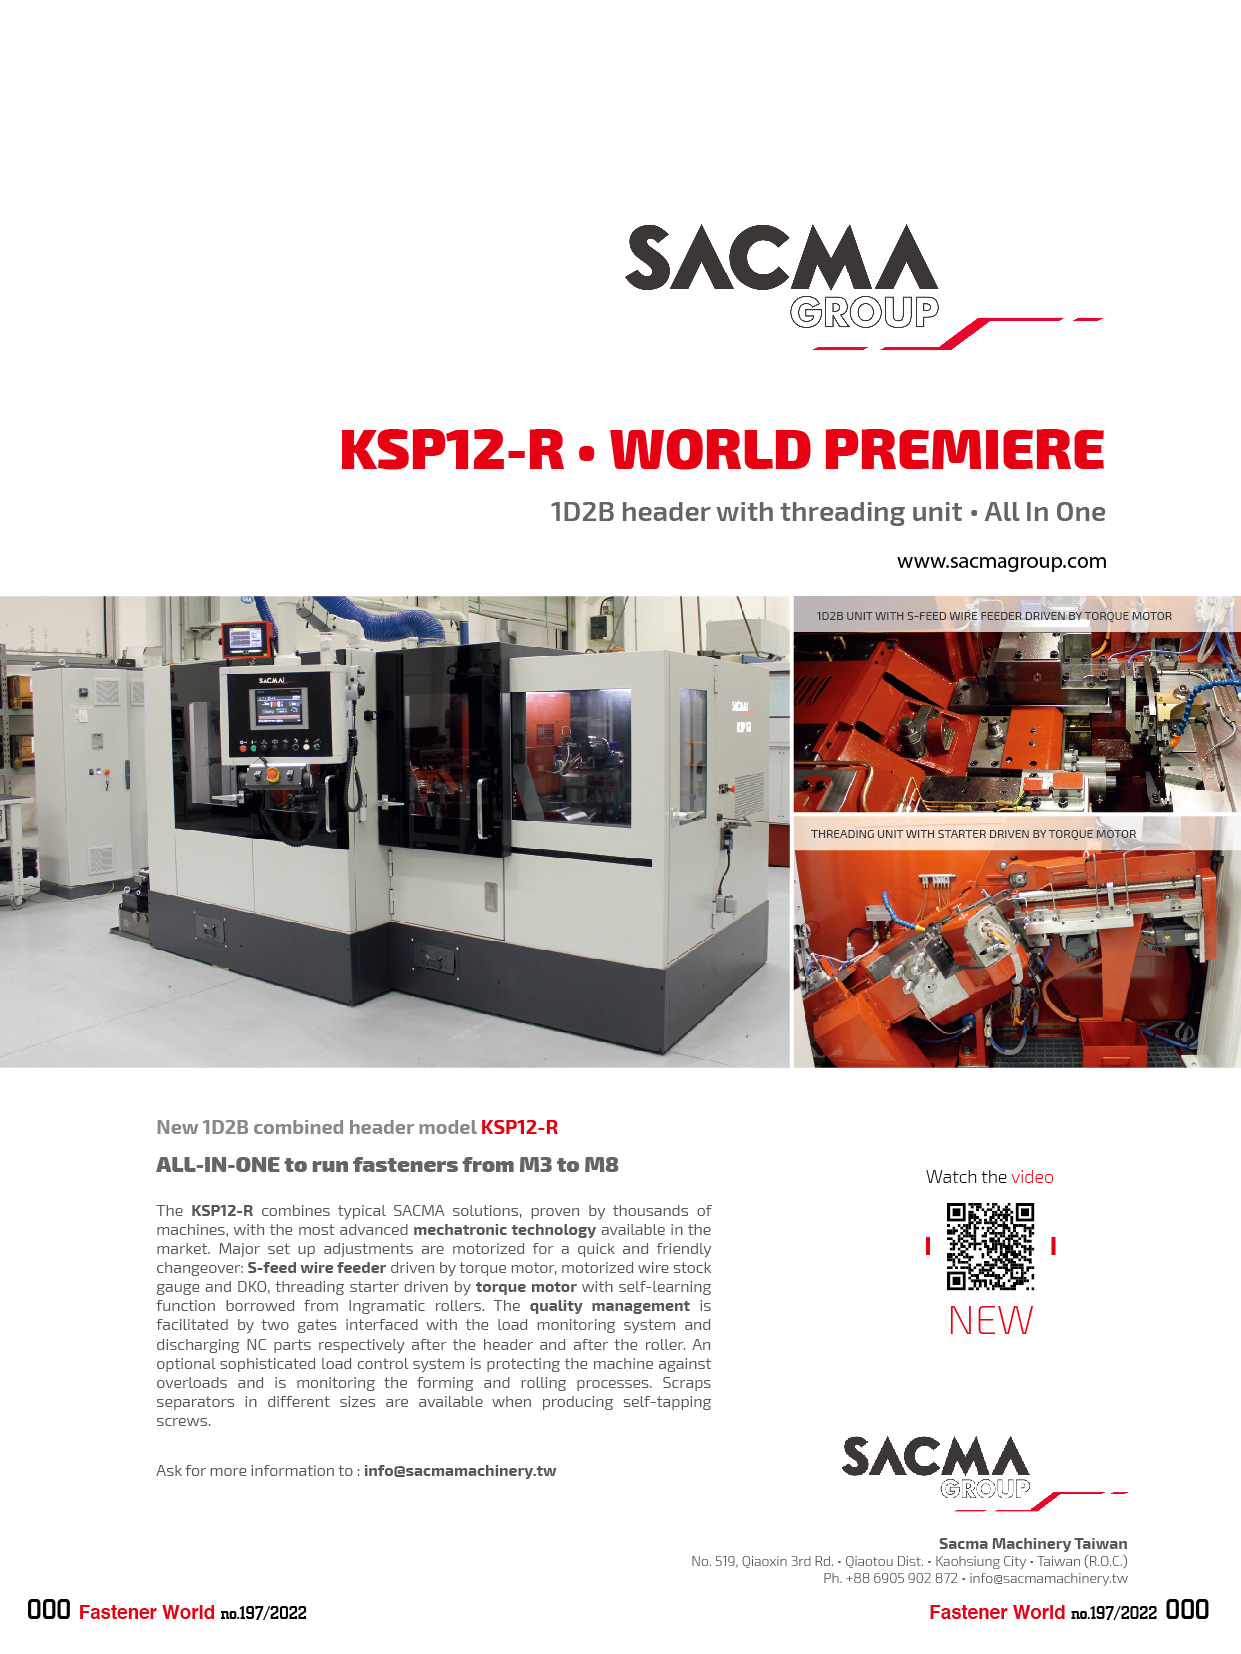 SACMA GROUP , KSP12-R, 1D2B Header with Threading Unit, All in One